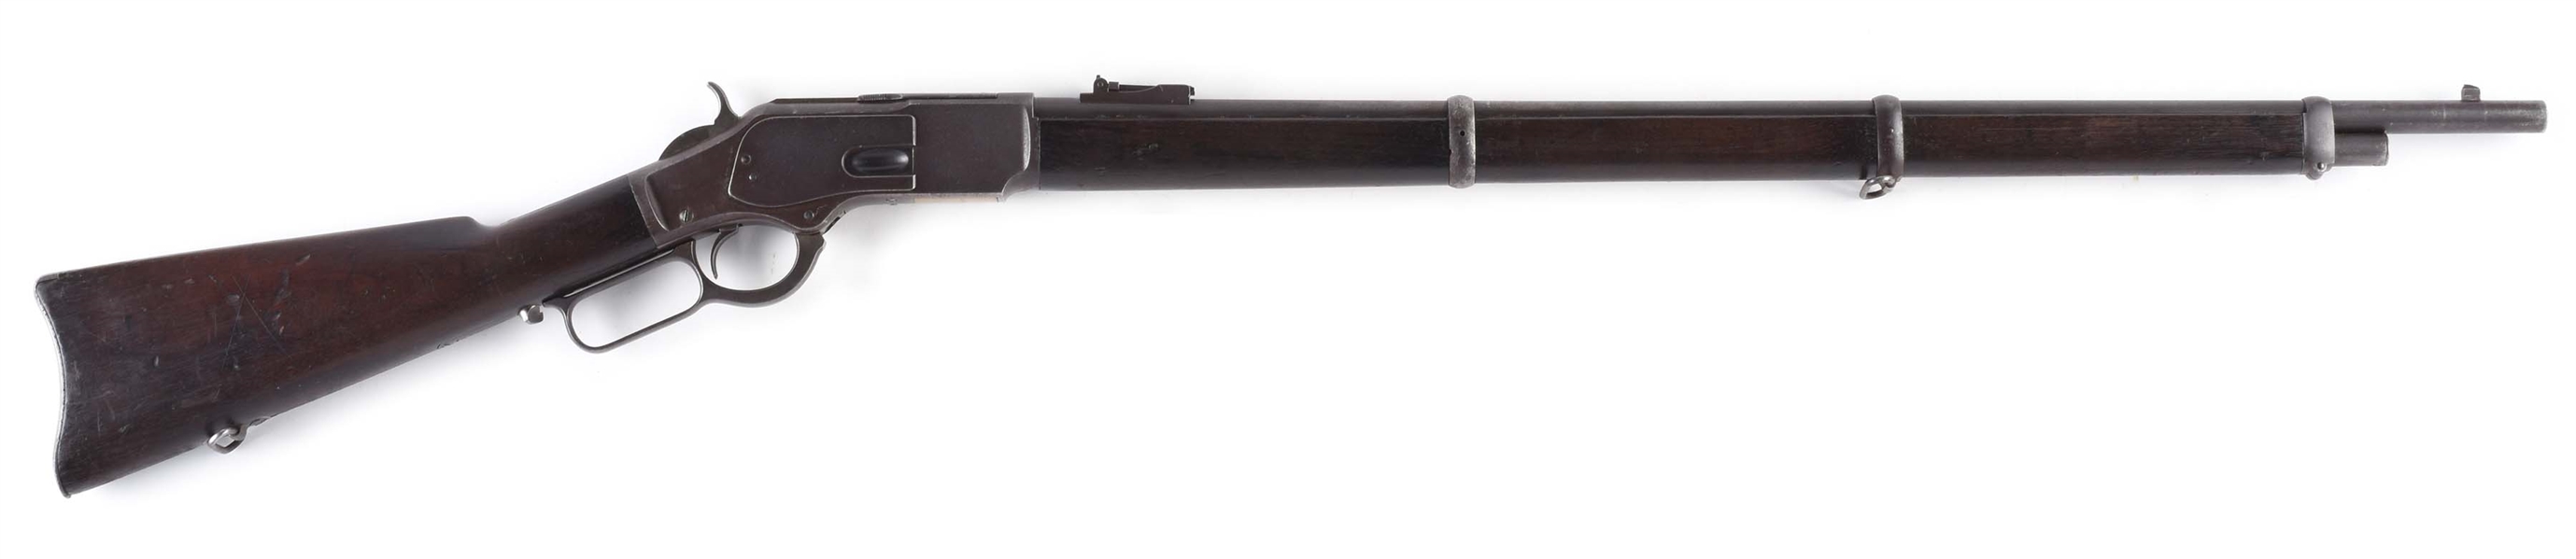 (A) WINCHESTER 3RD MODEL 1873 LEVER ACTION MUSKET (1894).